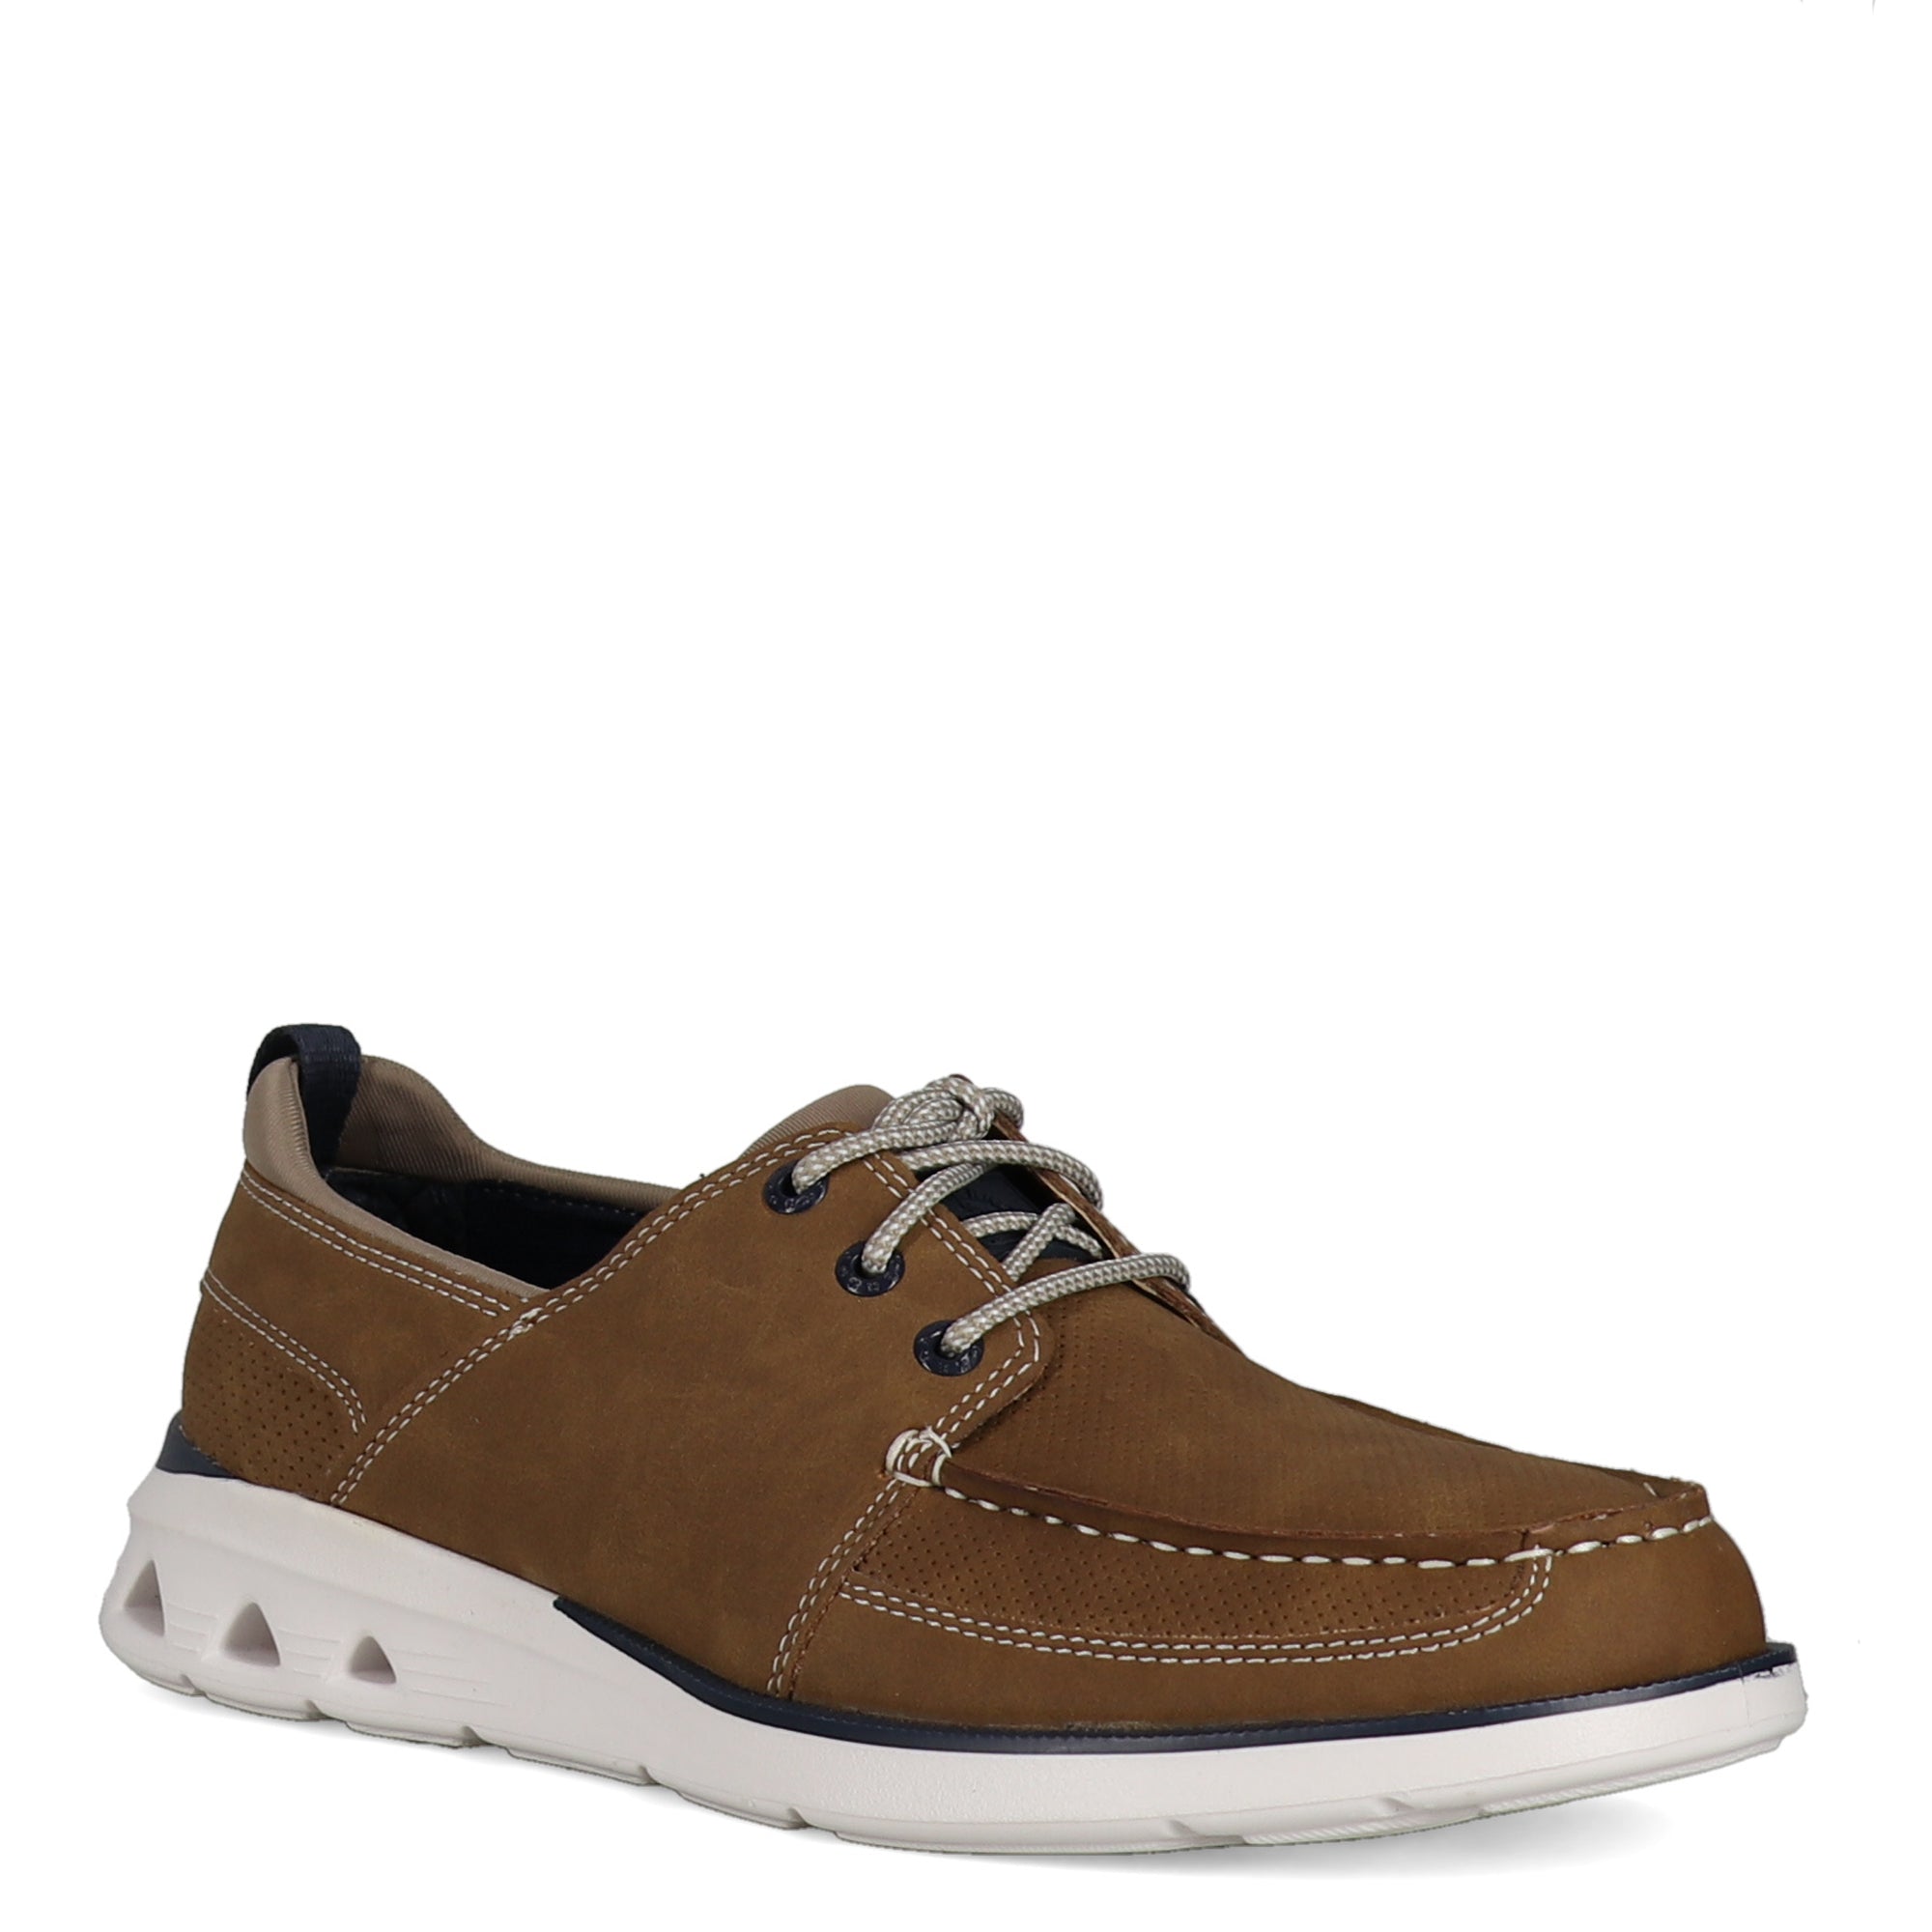 Dockers Shoes Saunders Tan Shoes